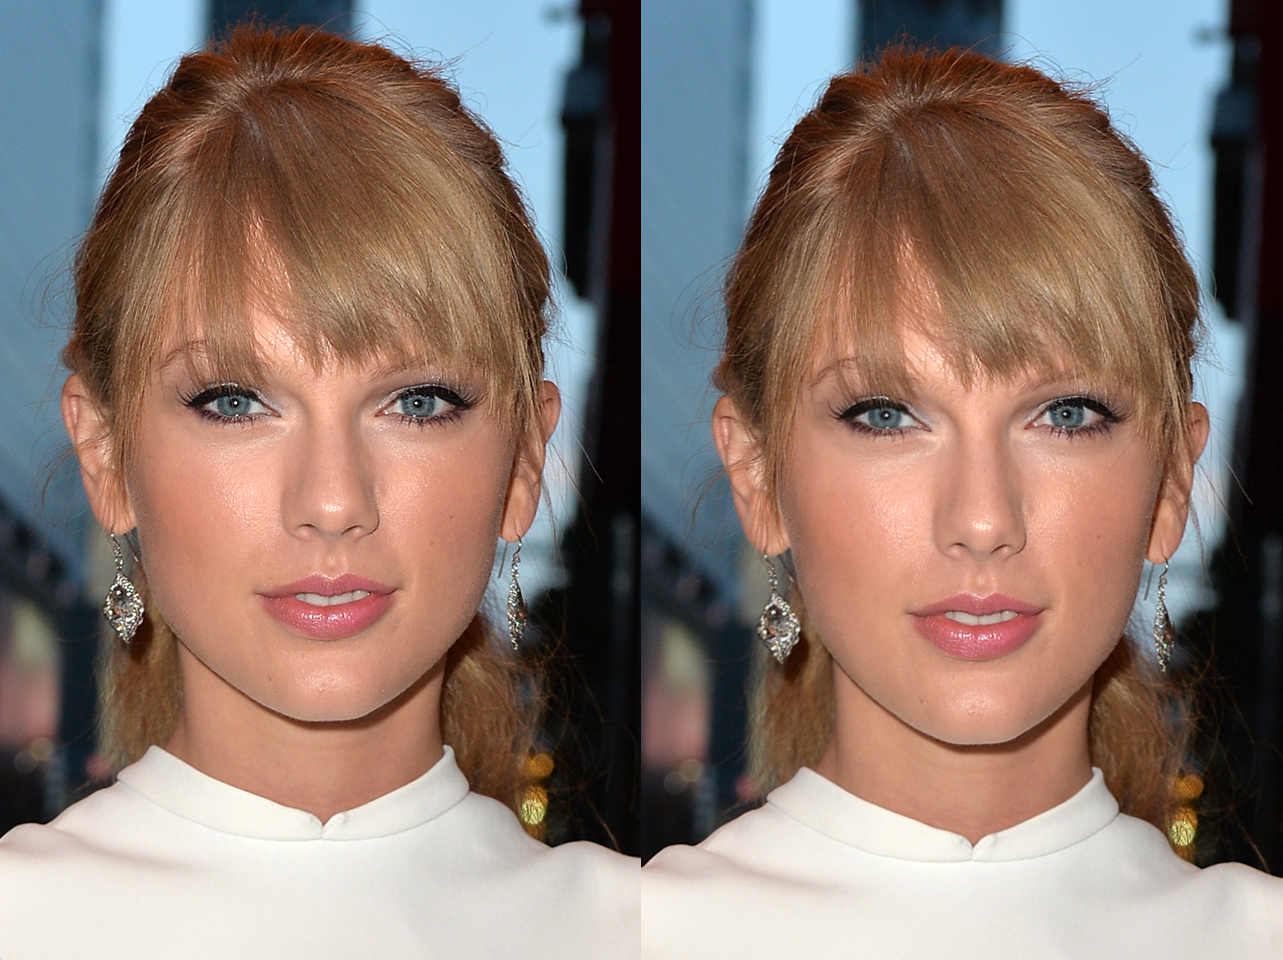 The real Taylor Swift vs Ideal self | Source: Getty Images